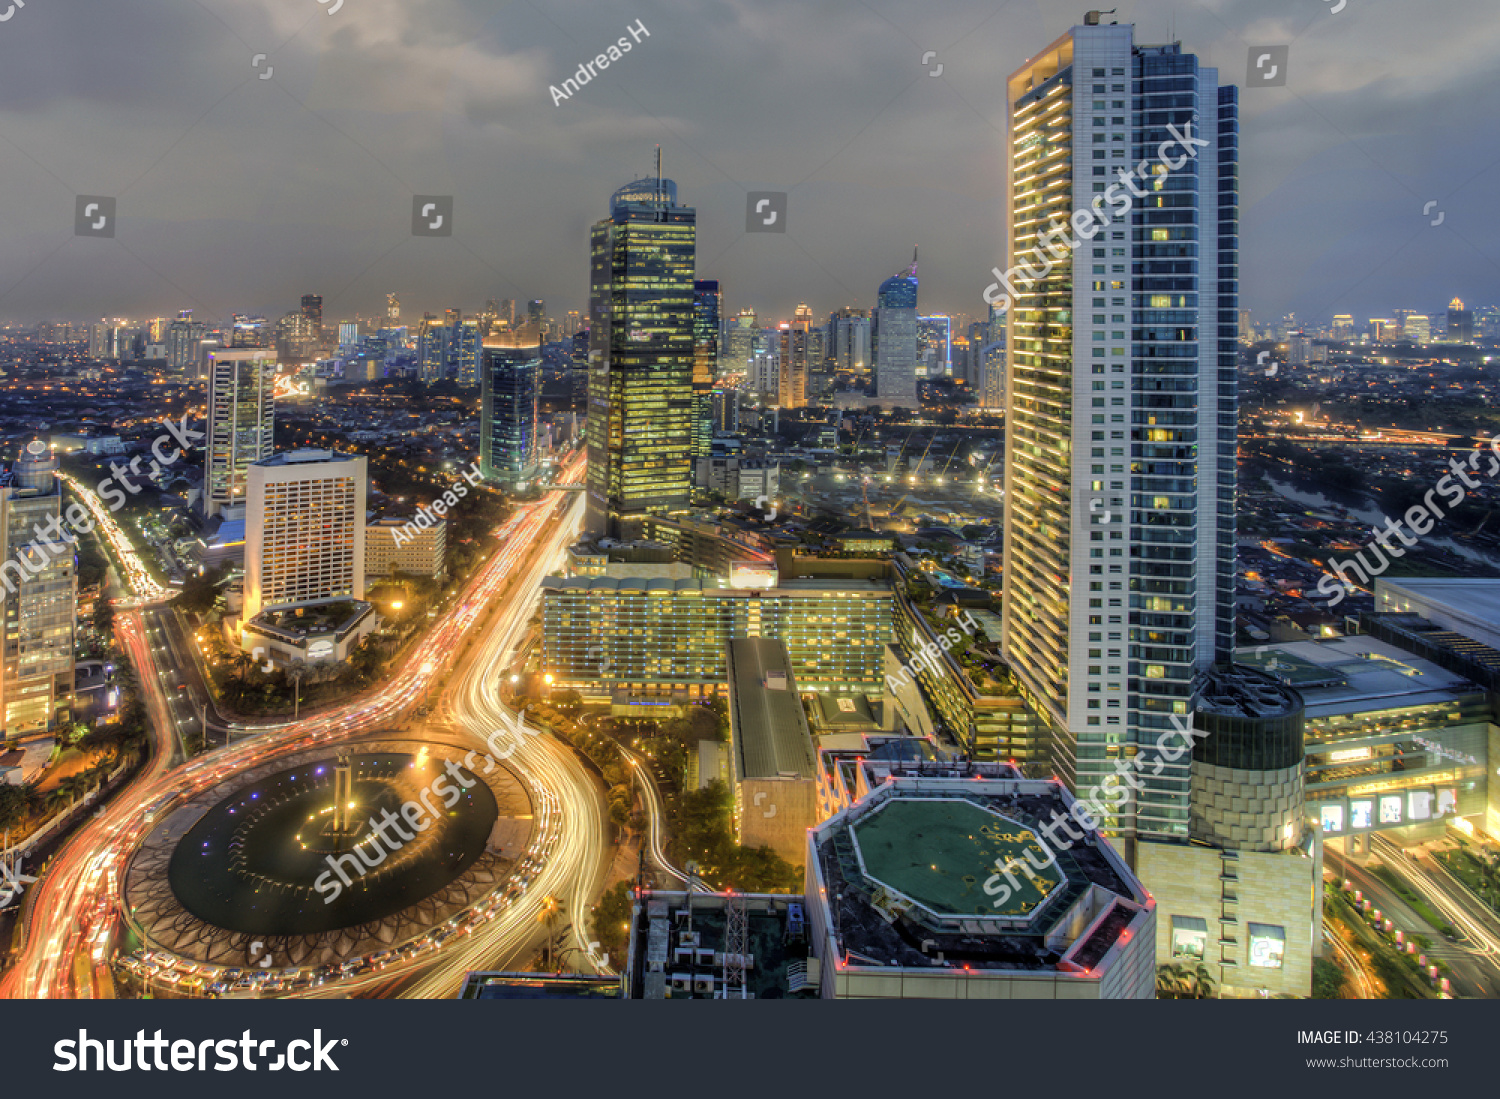 Selamat Datang Monument, also known as the Monumen Bundaran HI, is a monument located in Central Jakarta, Indonesia. Completed in 1962, It is one of the historic landmarks of Jakarta #438104275